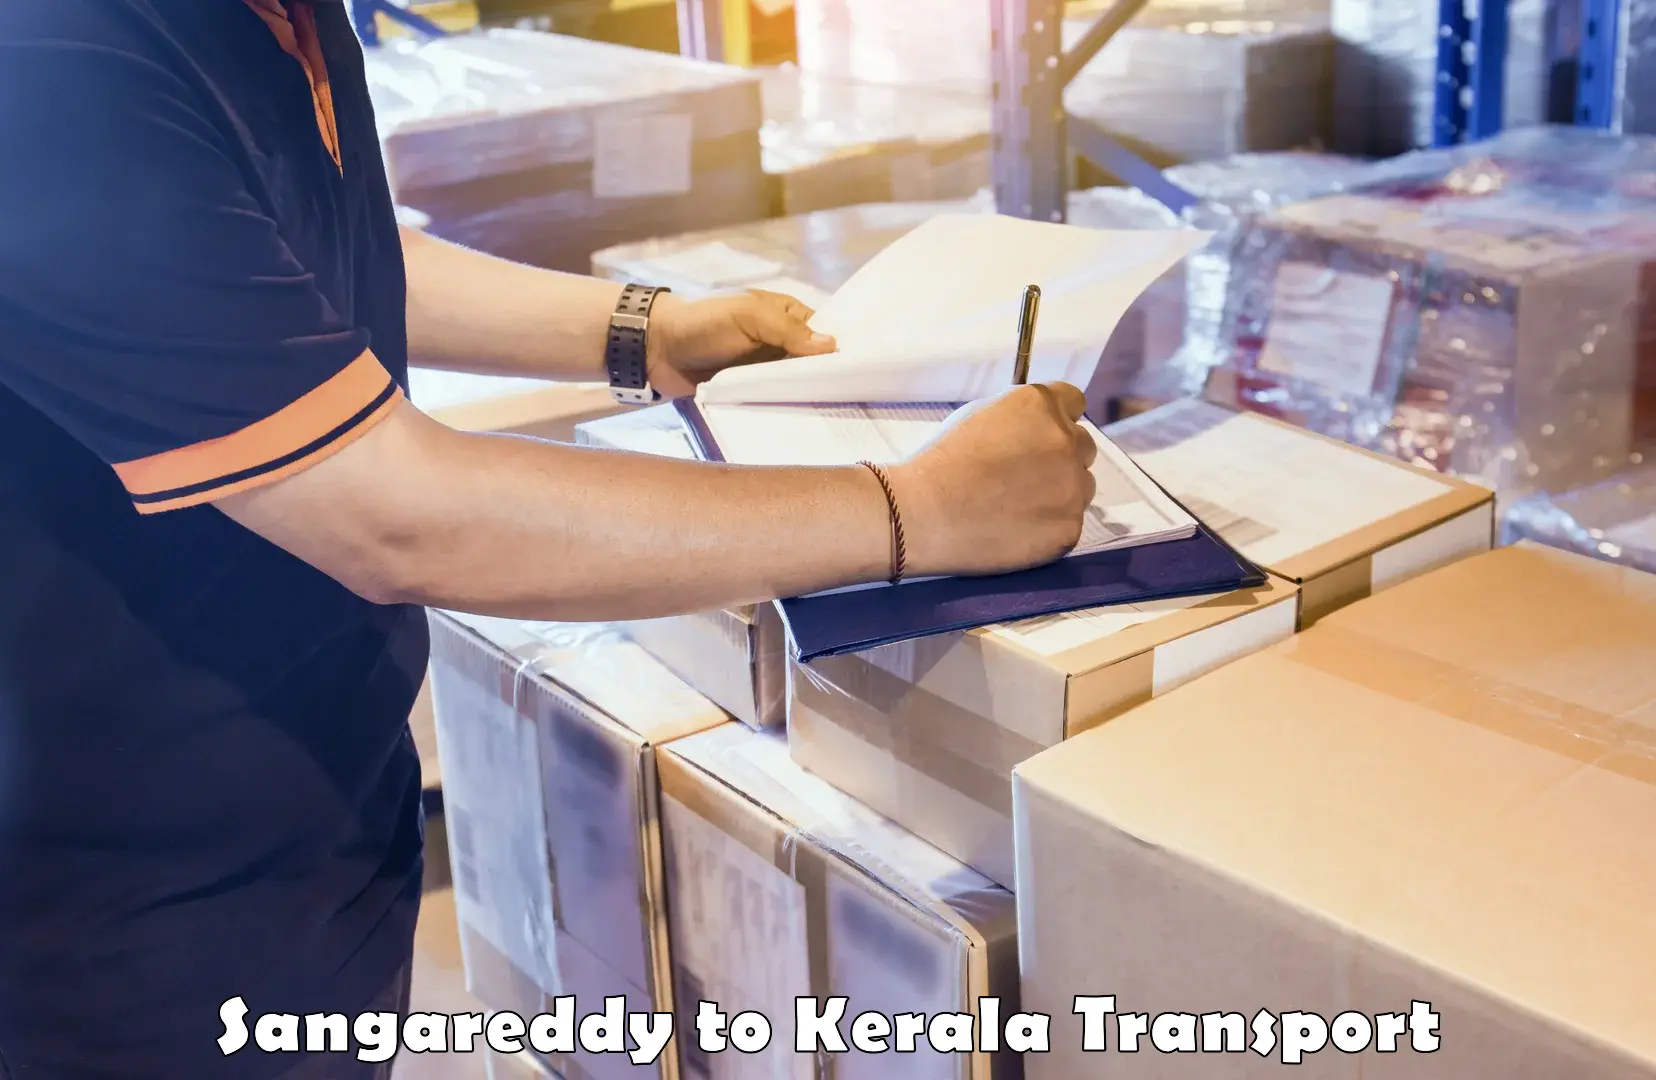 Goods delivery service Sangareddy to Kochi